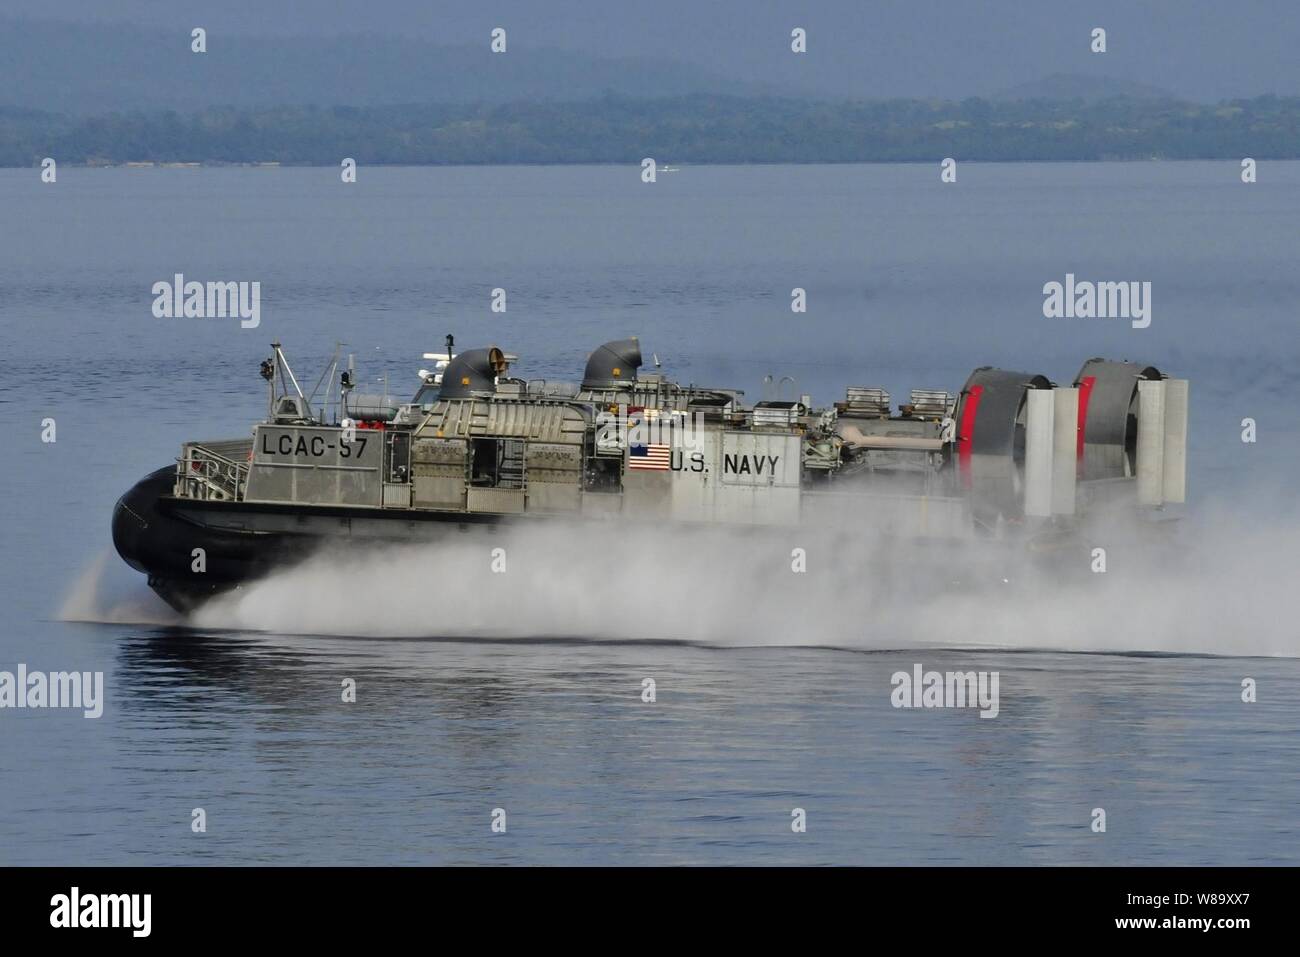 A landing craft, air cushion departs the well deck of the amphibious dock landing ship USS Harpers Ferry (LSD 49) during the Amphibious Landing Exercise (PHIBLEX) in the South China Sea near Puerto Princesa, Philippines, on Oct. 20, 2009.  The Harpers Ferry, the amphibious dock landing ship USS Tortuga (LSD 46) and the Marine Corps 31st Marine Expeditionary Unit are participating in PHIBLEX, an annual bilateral amphibious landing training exercise between the United States and the Armed Forces of the Philippines. Stock Photo